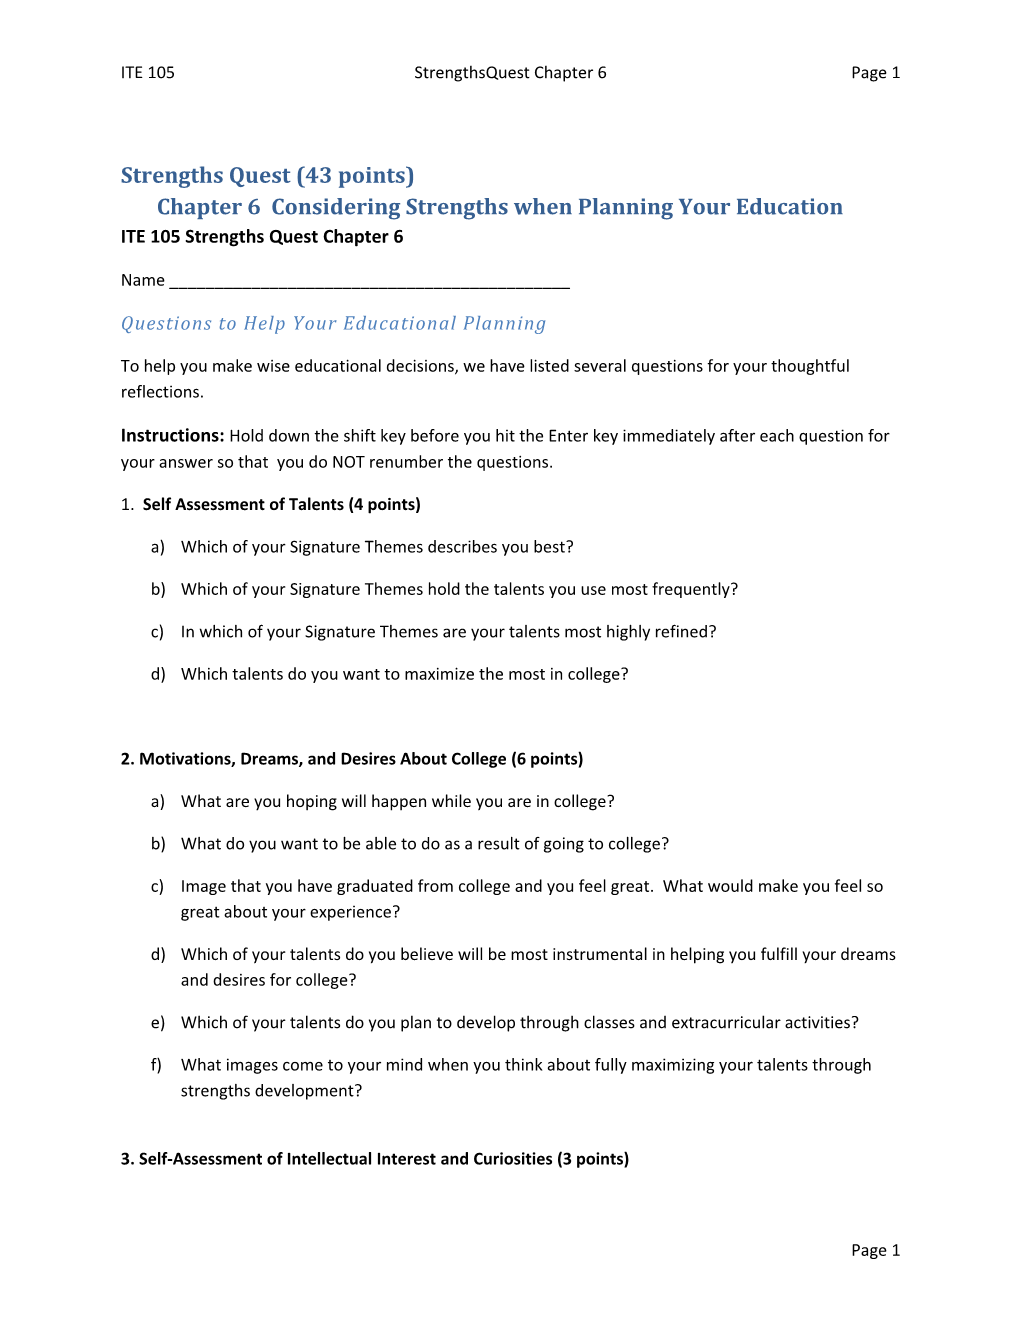 Strengths Quest (43 Points)Chapter 6 Considering Strengths When Planning Your Education